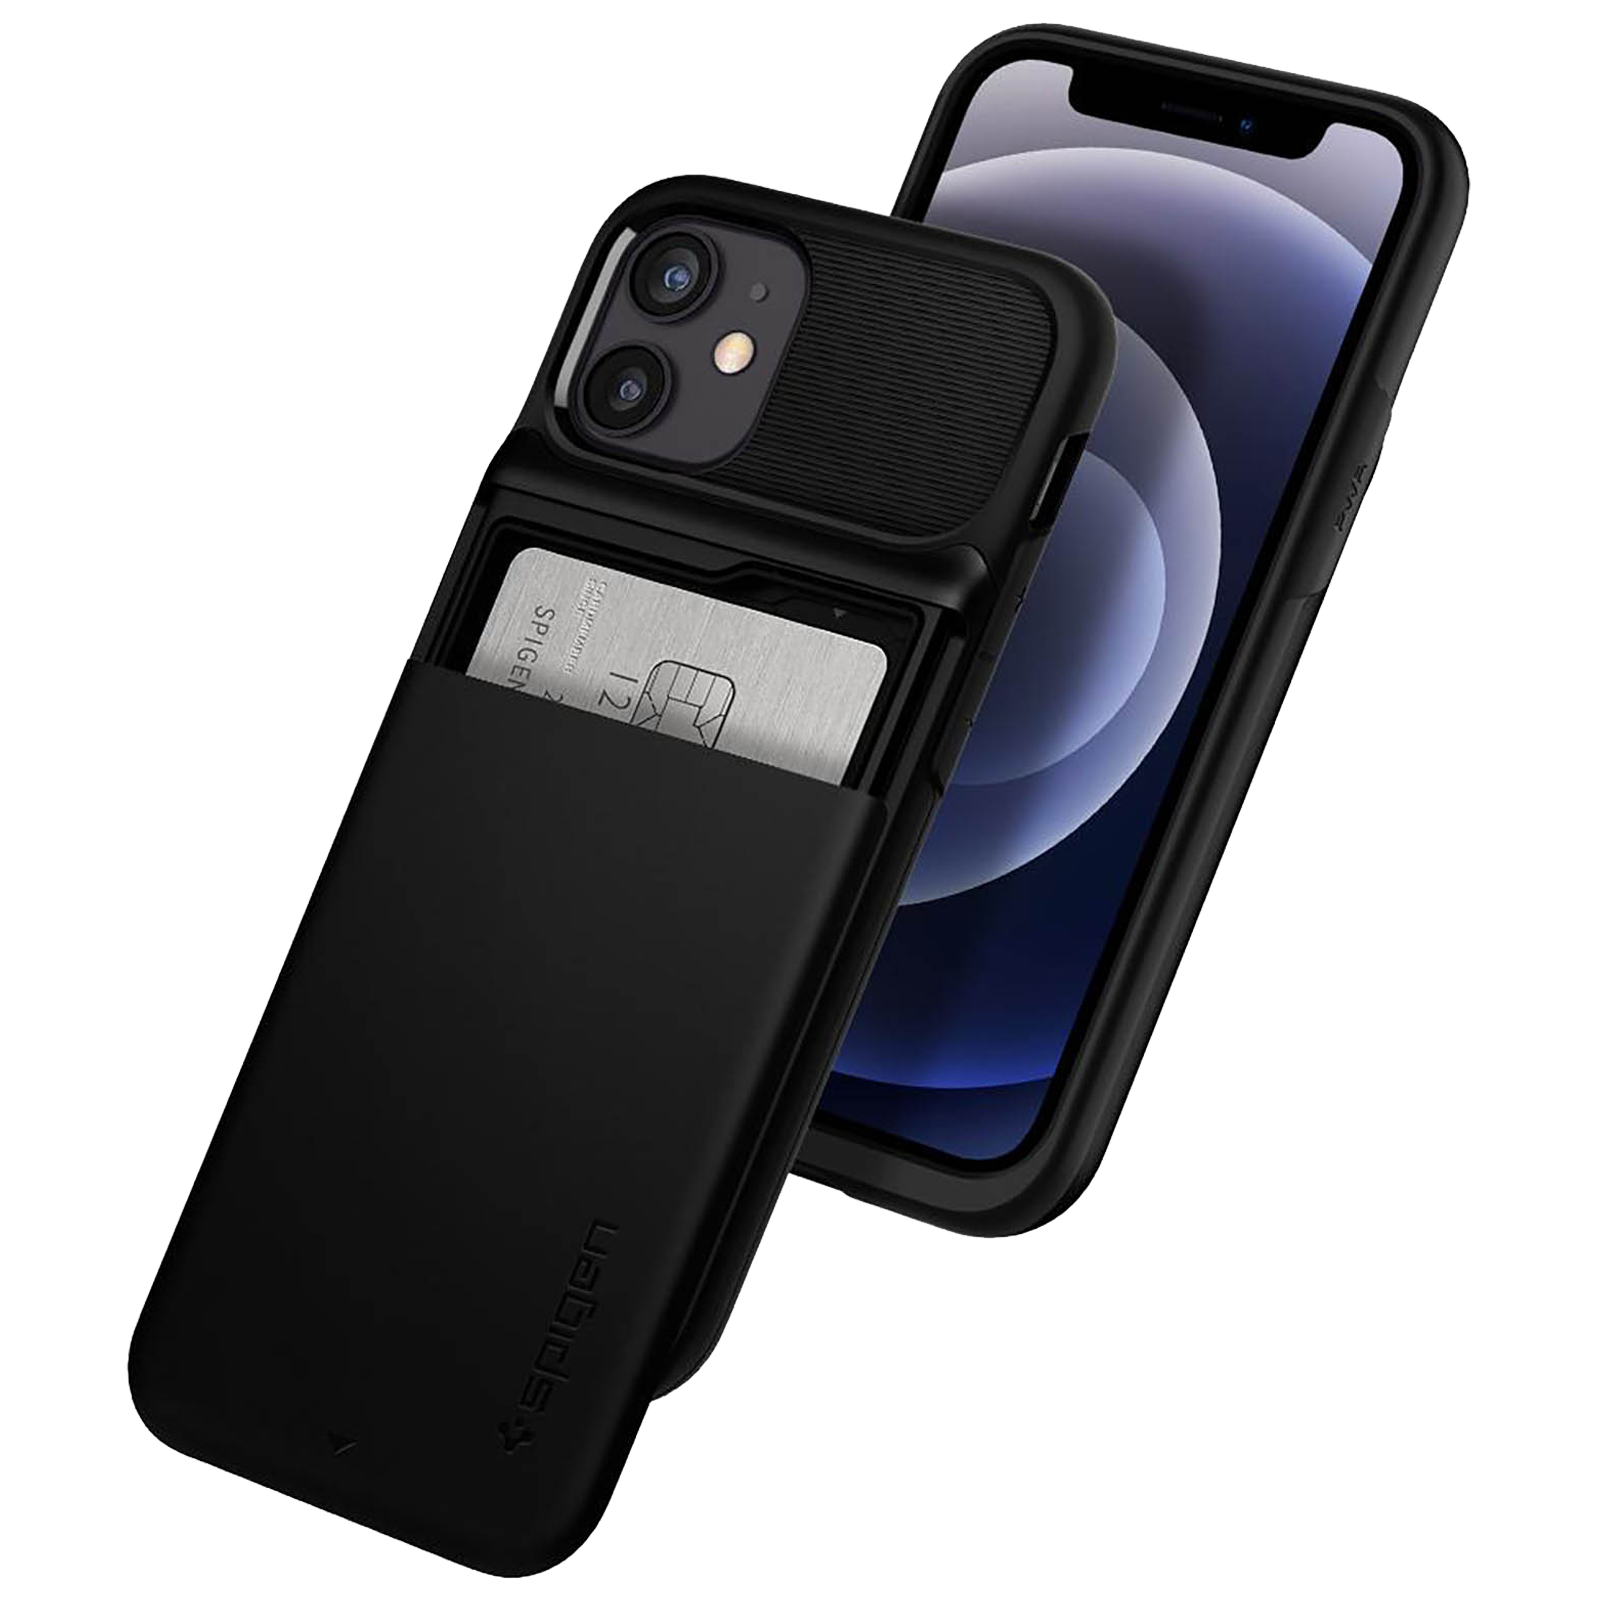 Buy Spigen Slim Armor Wallet TPU & PC Back Case For iPhone 12 Pro Max (Air  Cushion Technology, ACS01483, Black) Online - Croma